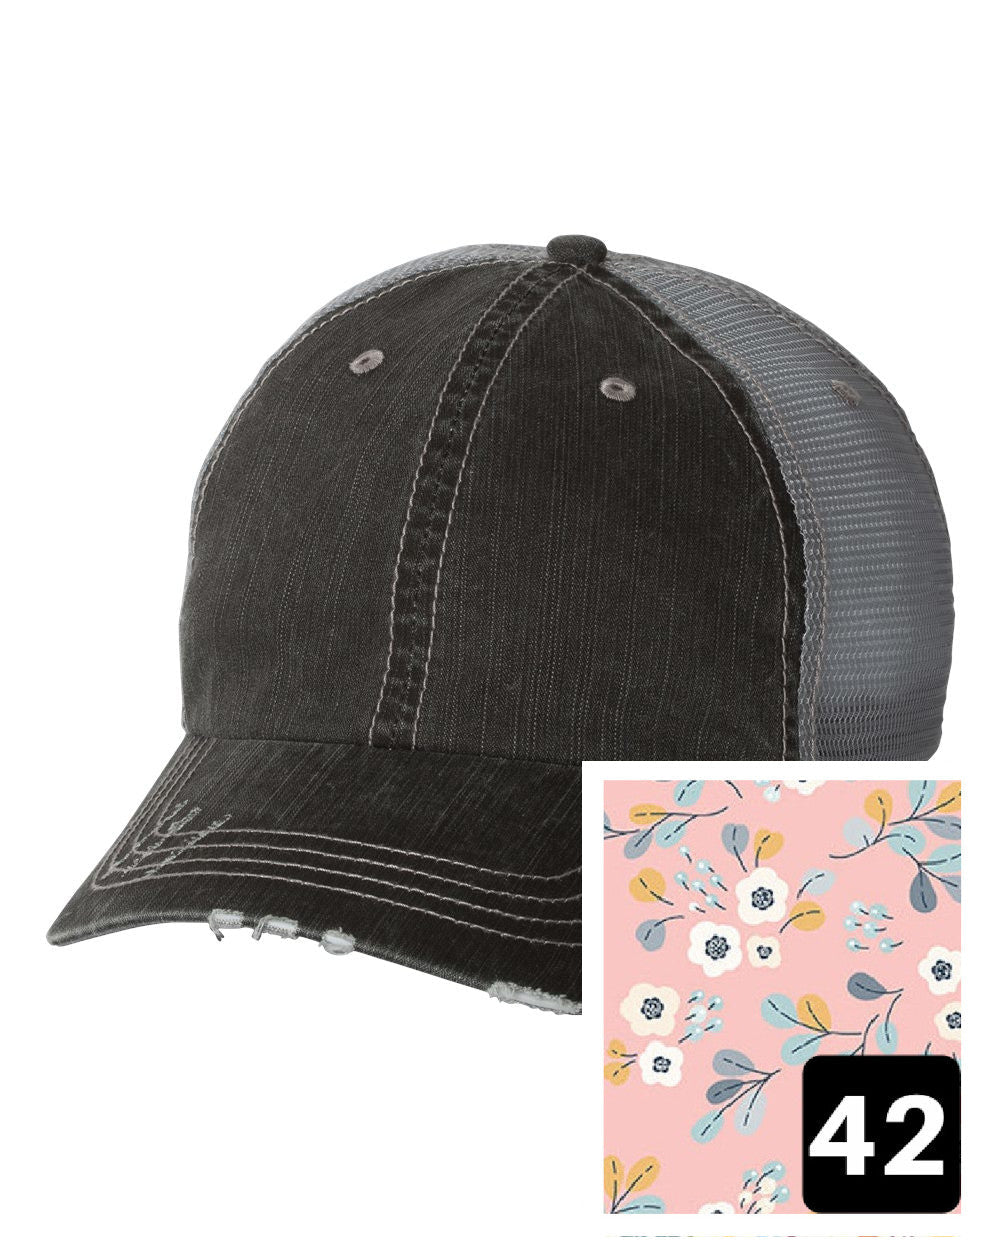 gray distressed trucker hat with light blue and pink mosaic fabric state of Oregon